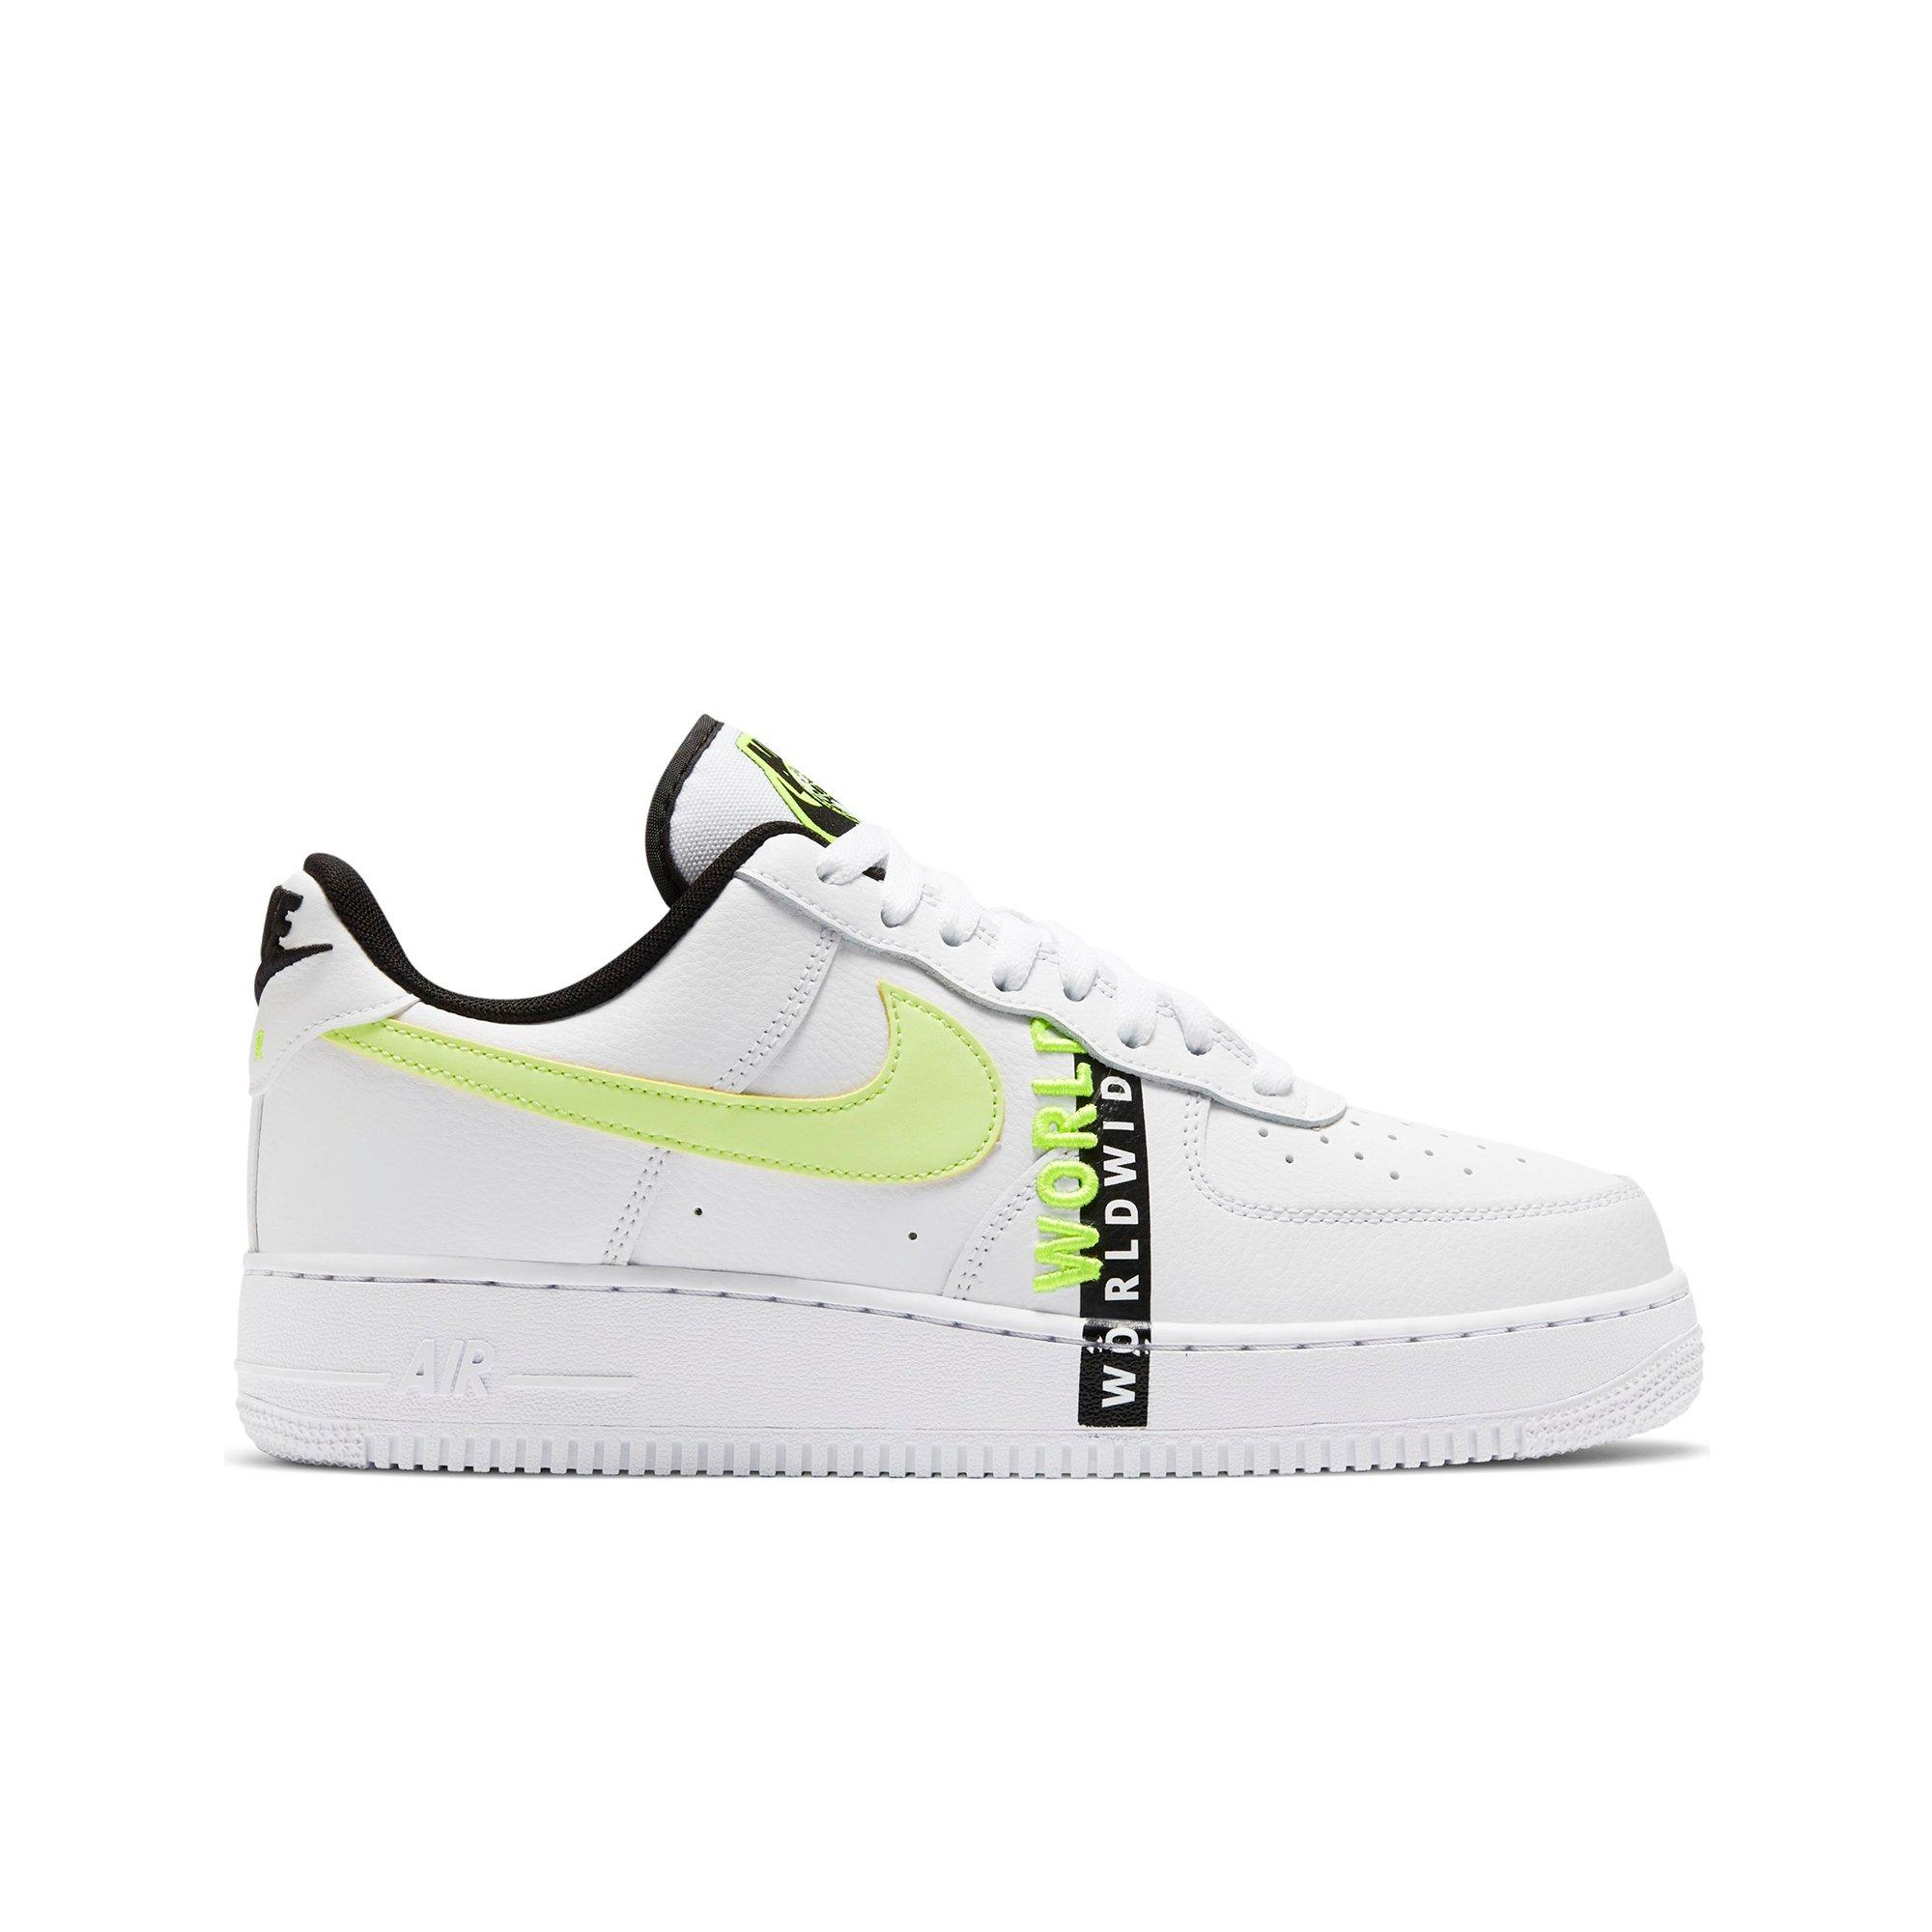 nike air force 1 07 women's white size 8.5